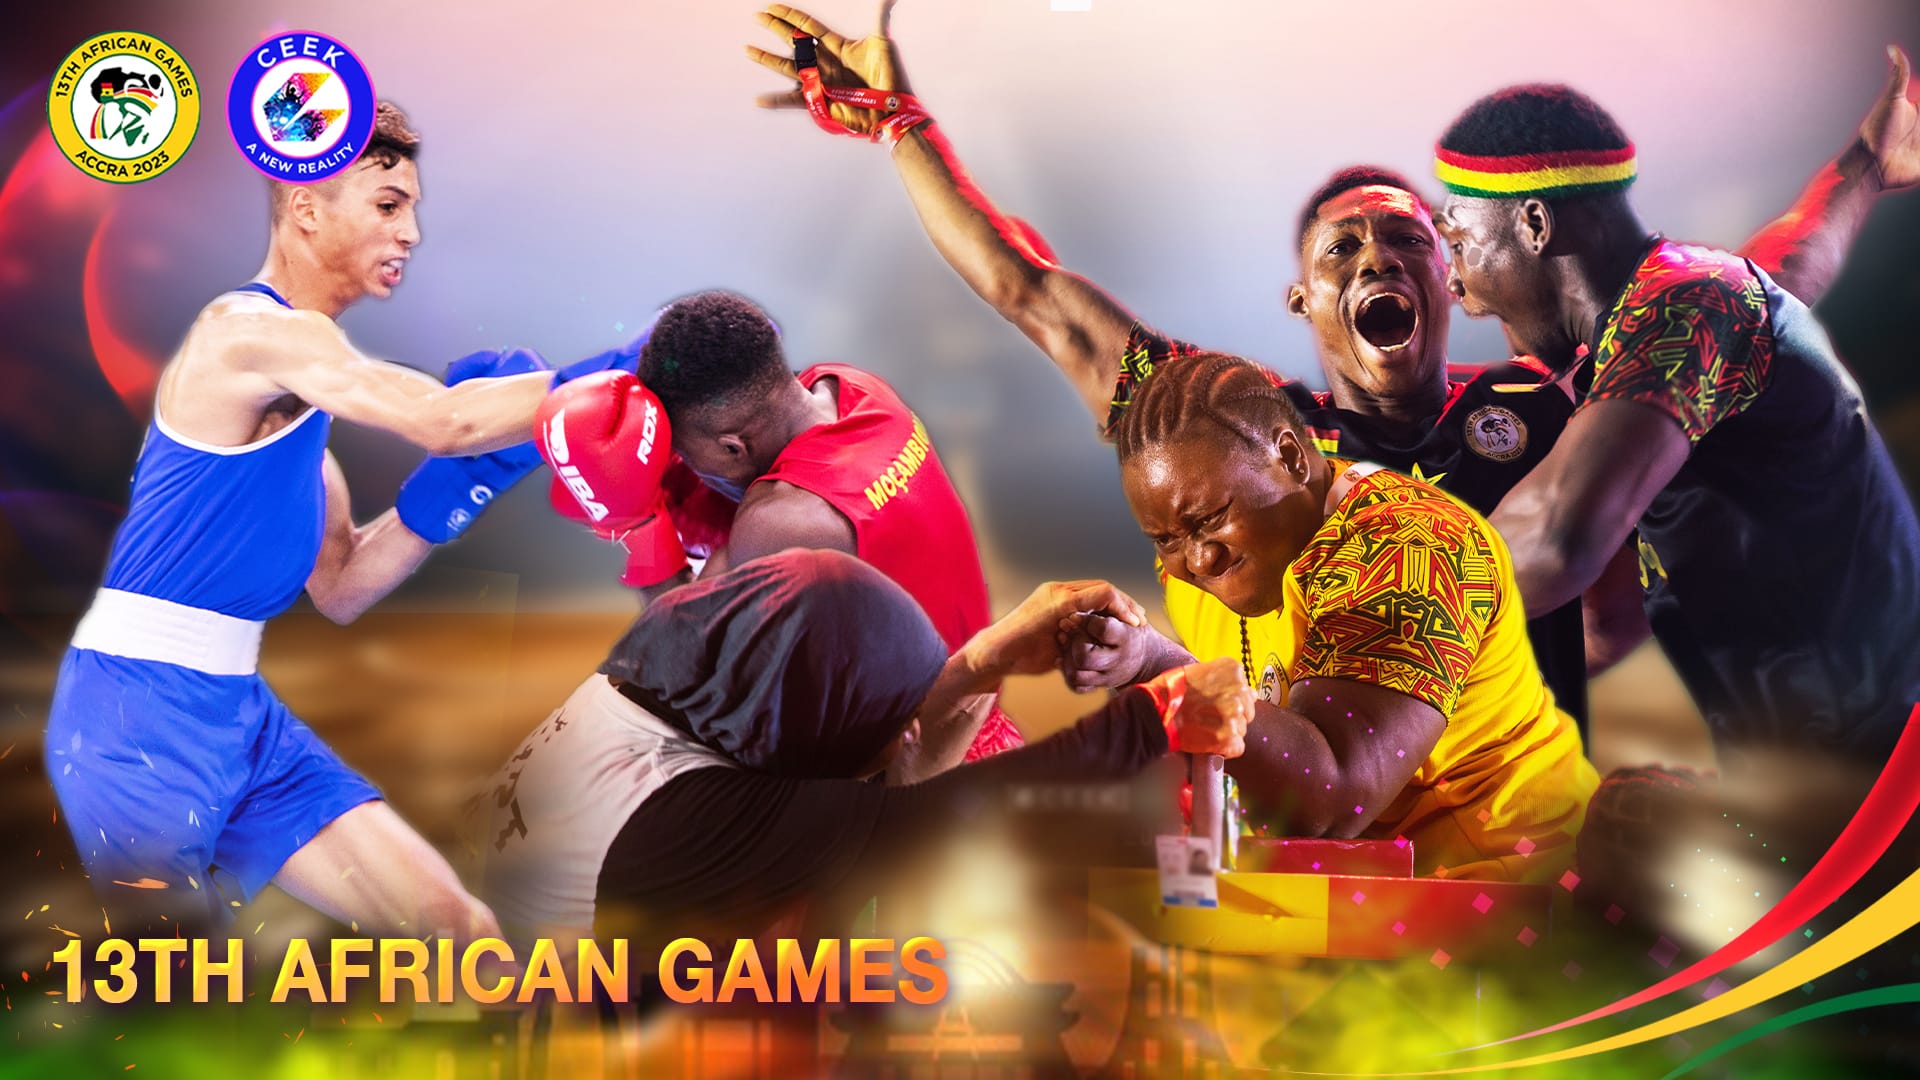 Accra African Games 20th March